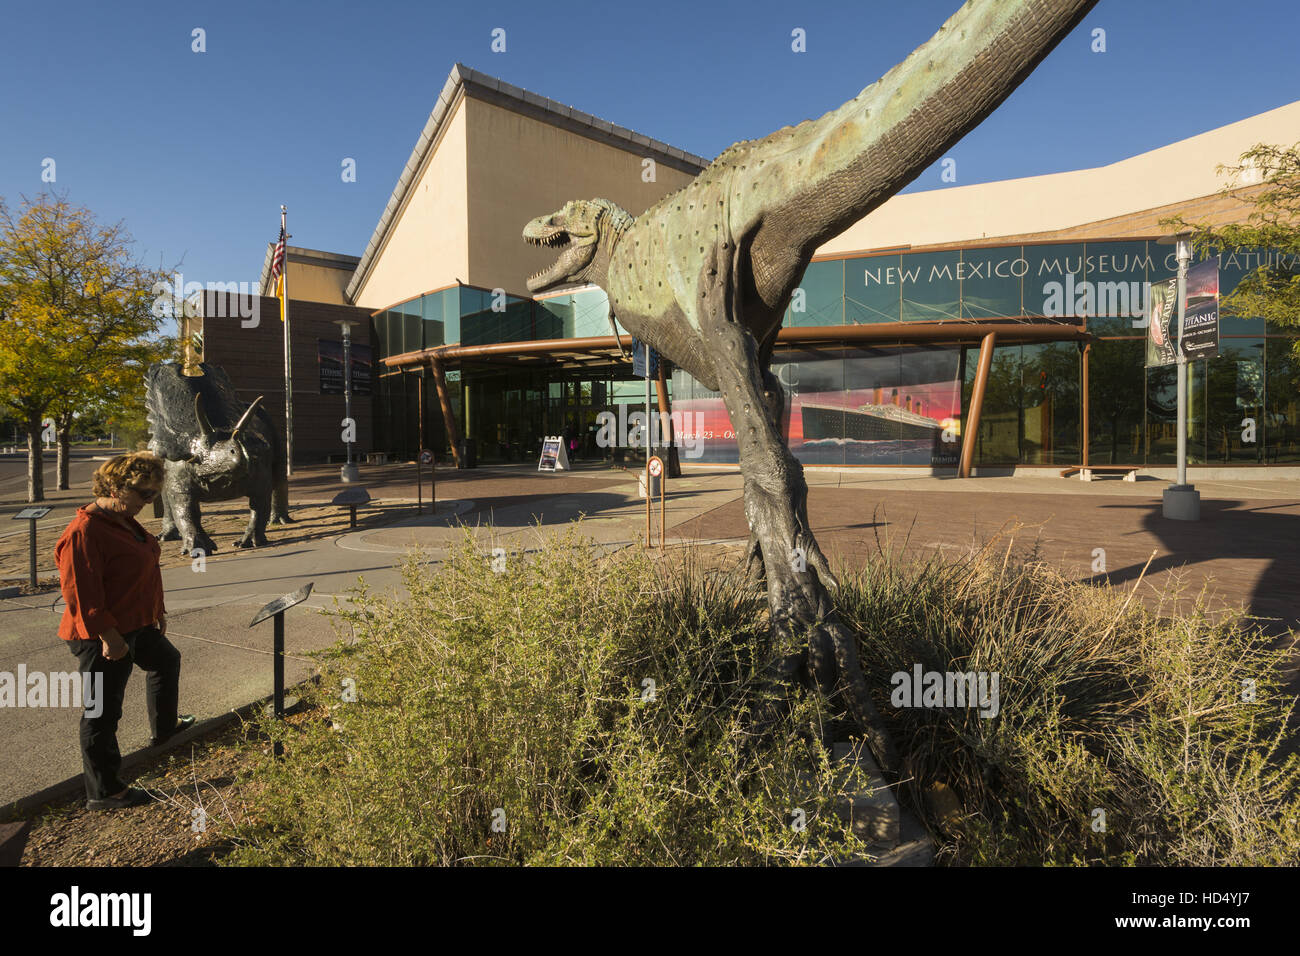 New Mexico, Albuquerque, New Mexico Museum of Natural History and Science Stock Photo